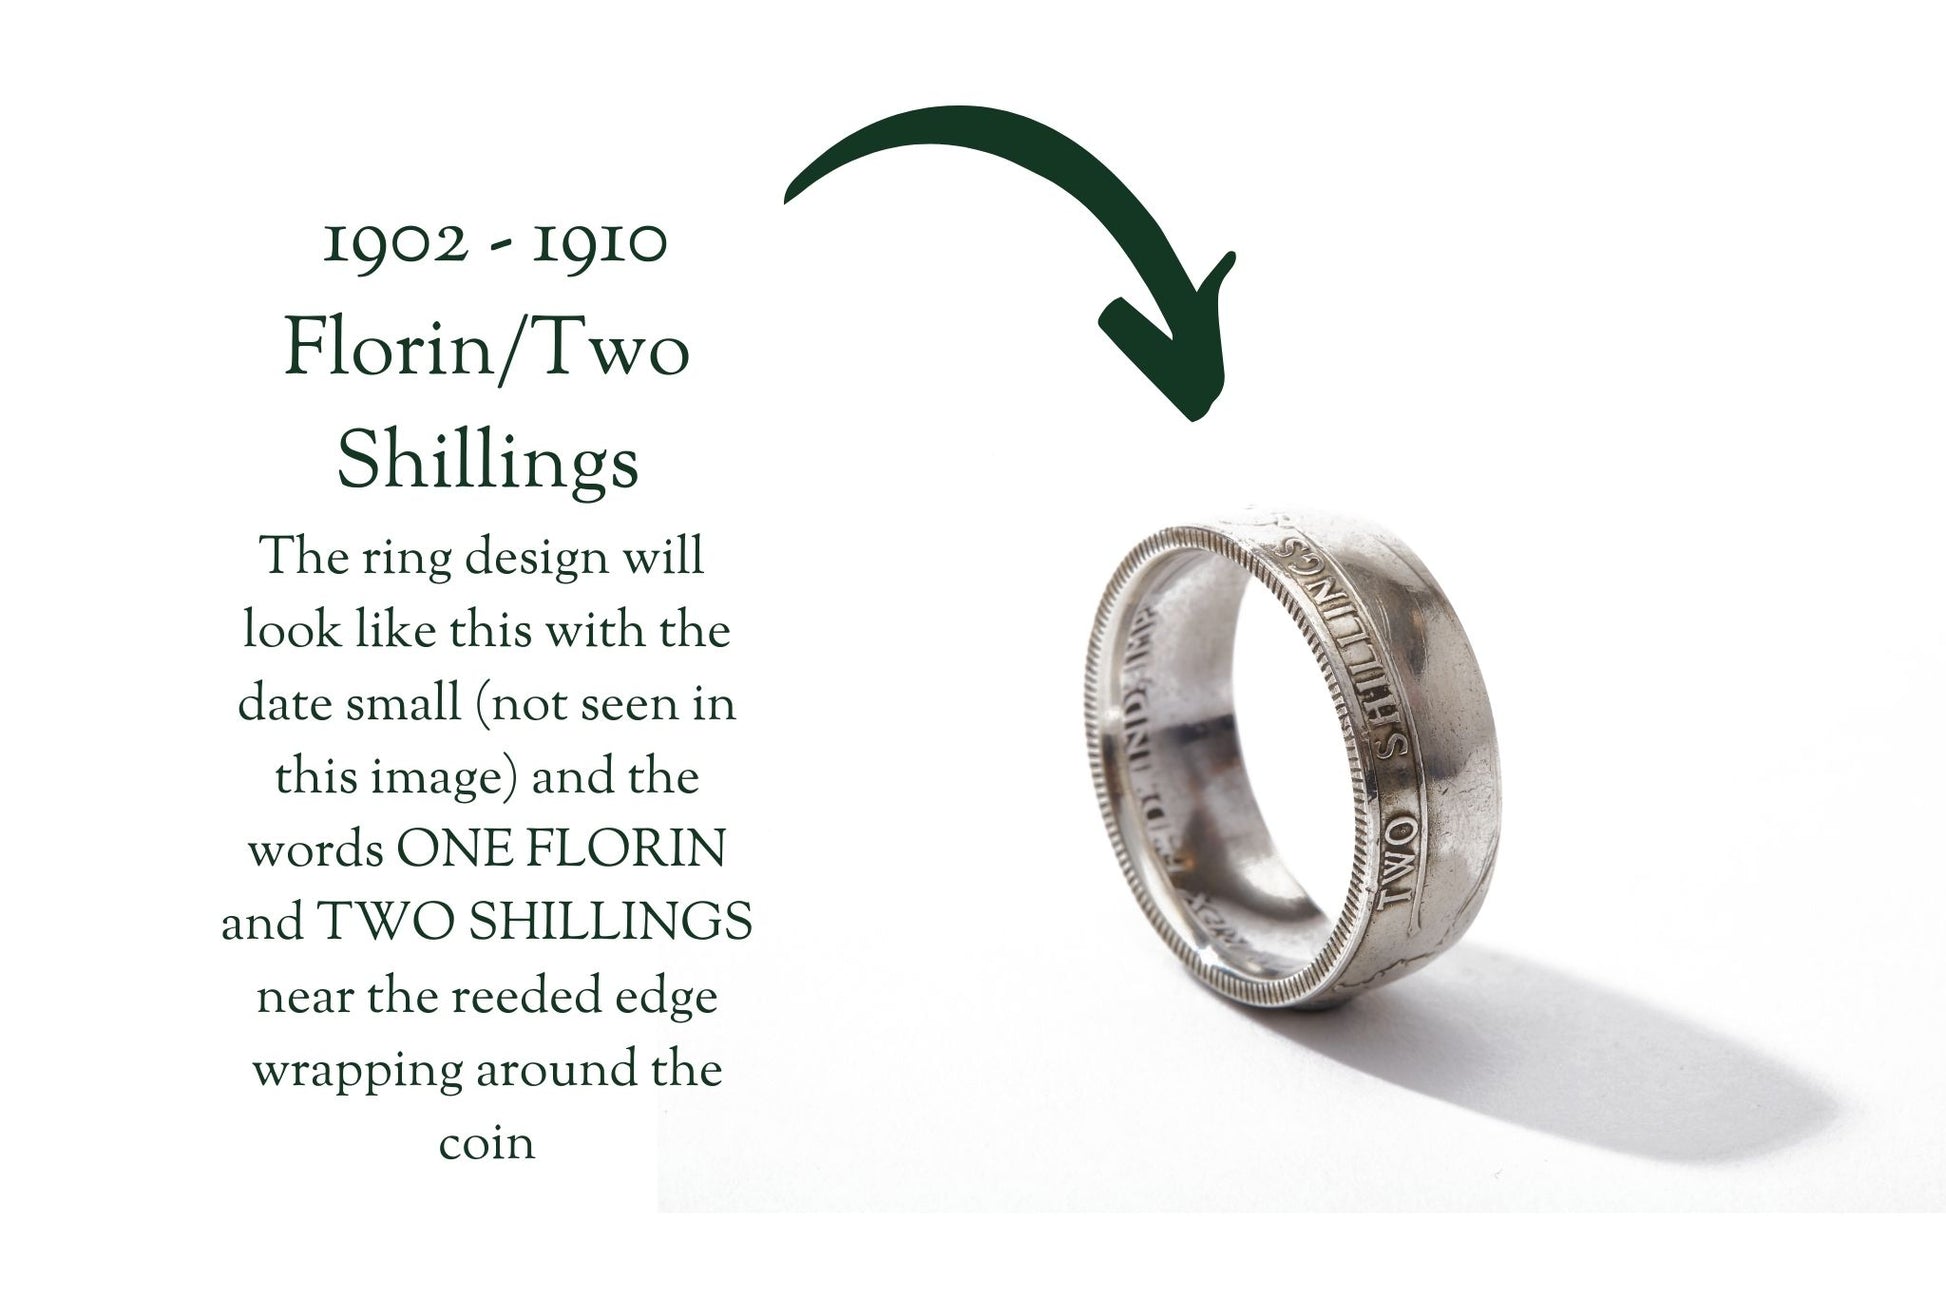 1902 - 1910 florin coin ring infographic